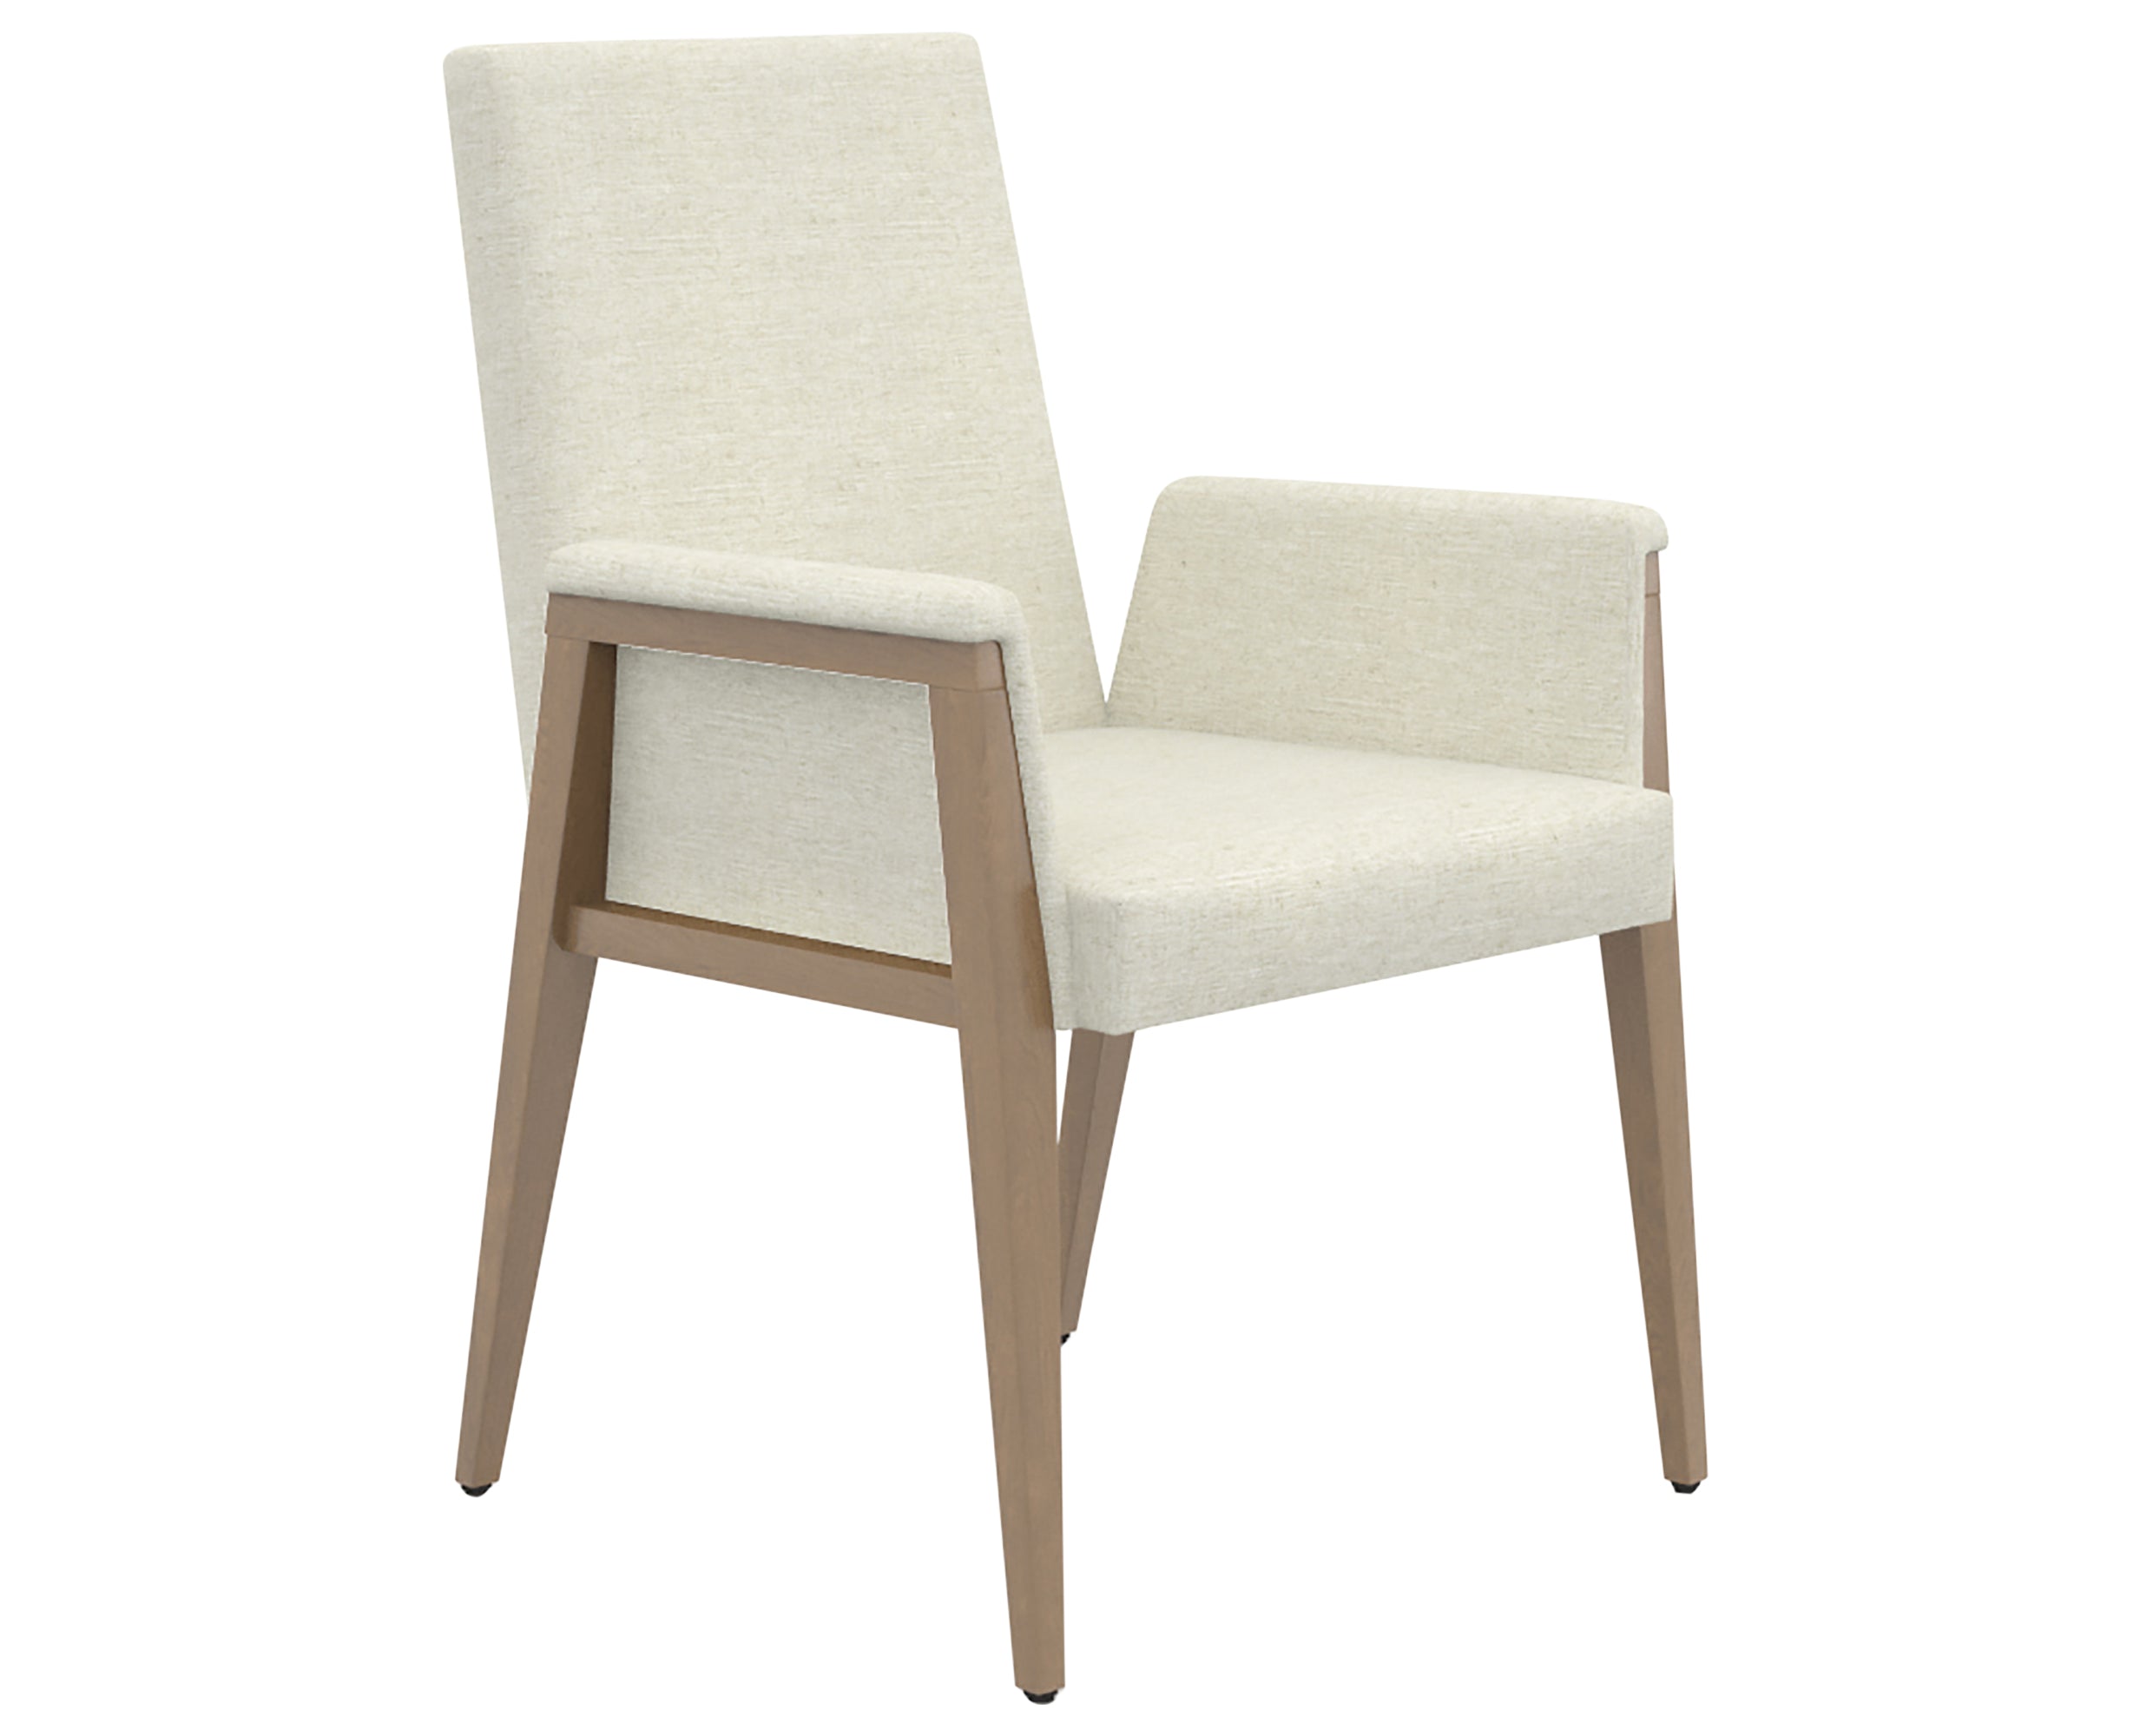 Pecan Washed &amp; Fabric TW | Canadel Modern Dining Chair 5177 | Valley Ridge Furniture